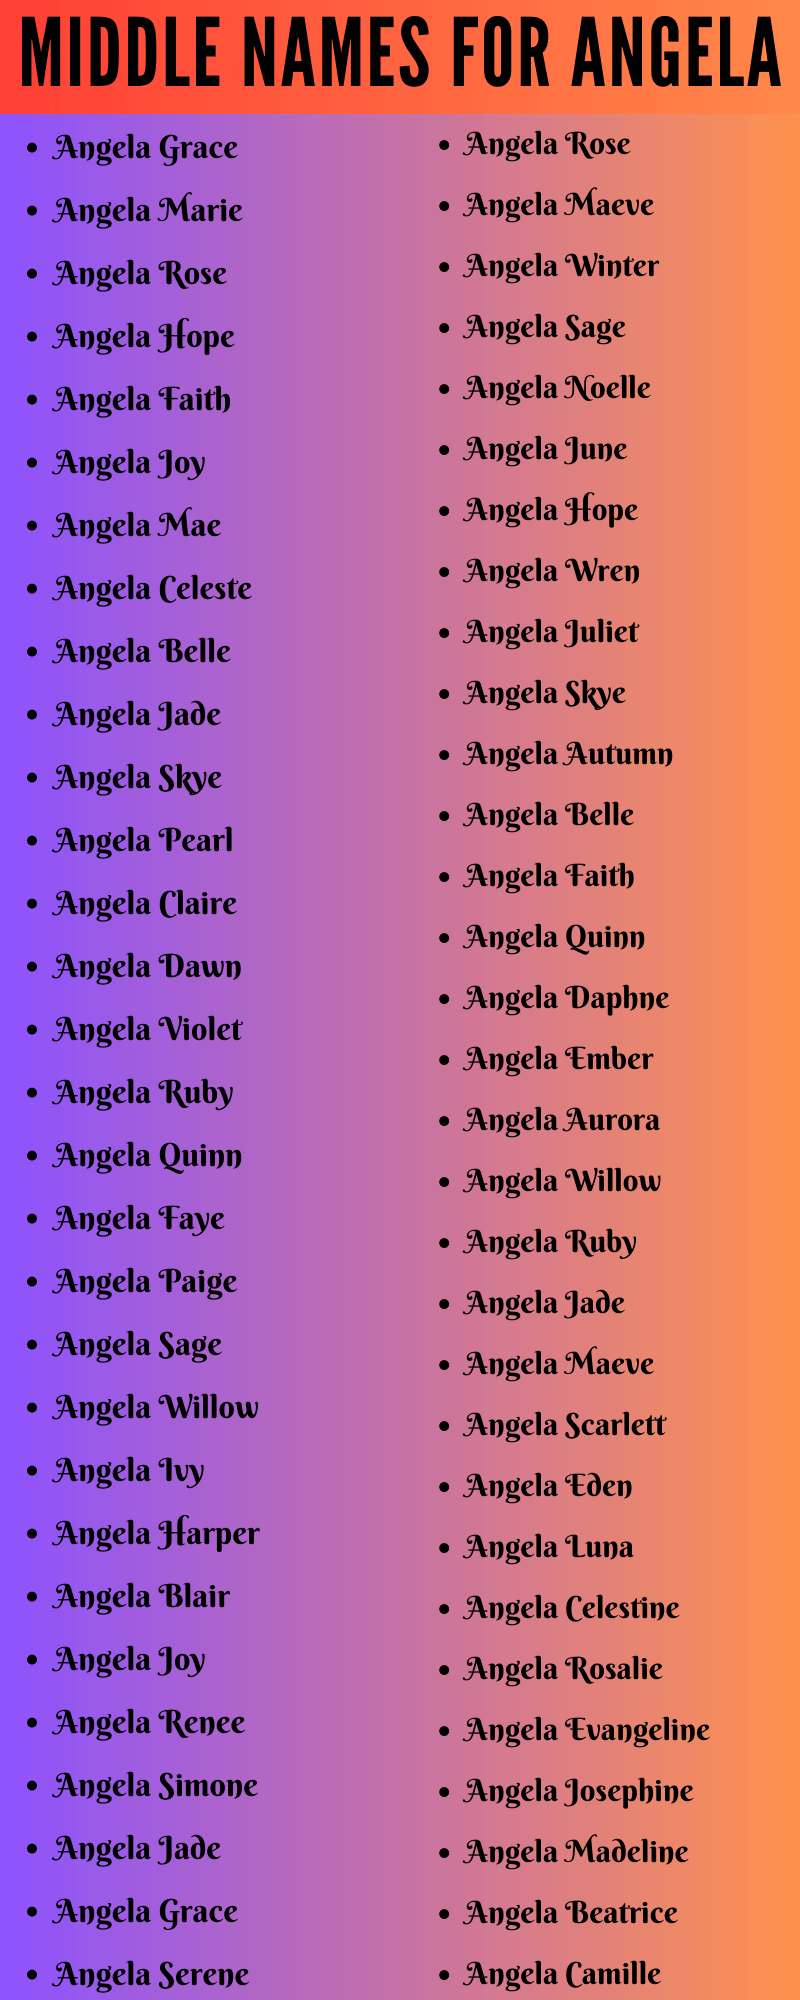  400 Classy Middle Names For Angela